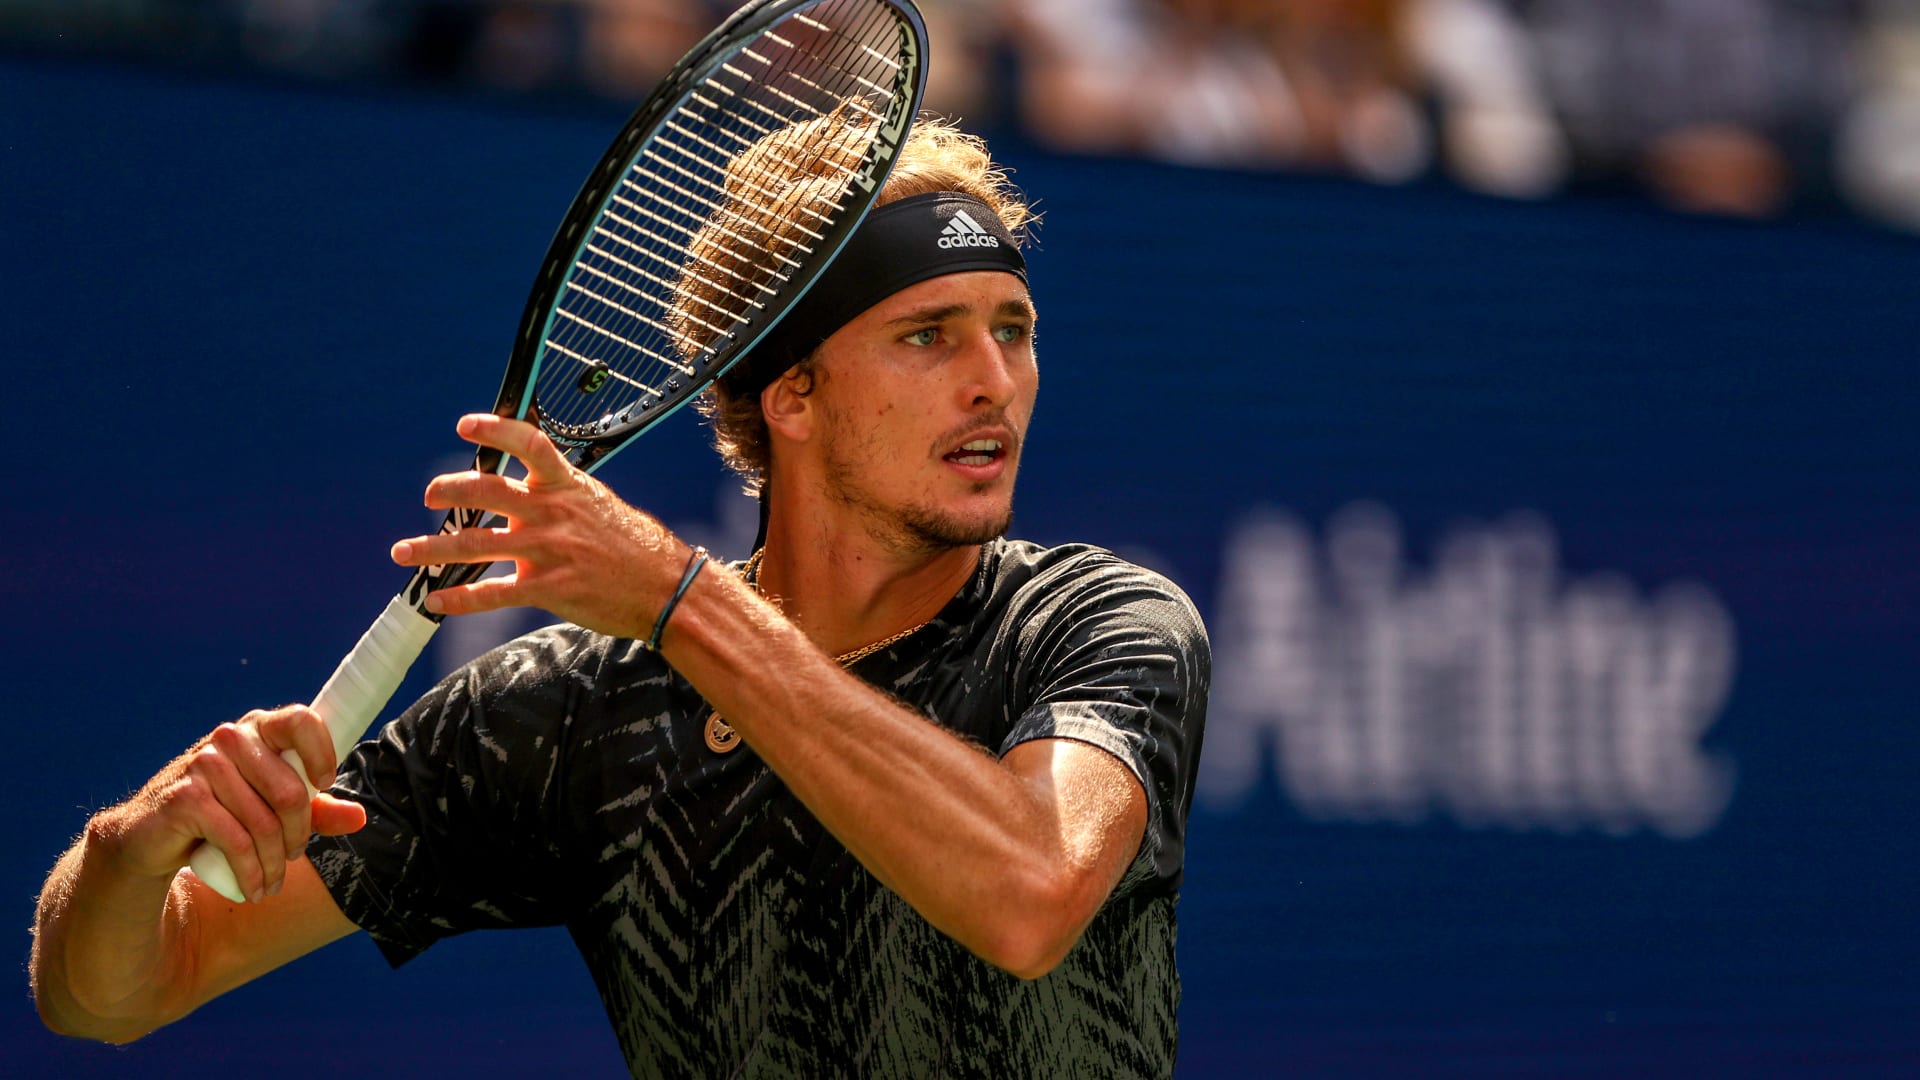 Alexander Zverev won his 16th successive match, but were the signs all good for his potential US Open semifinal with Djokovic?